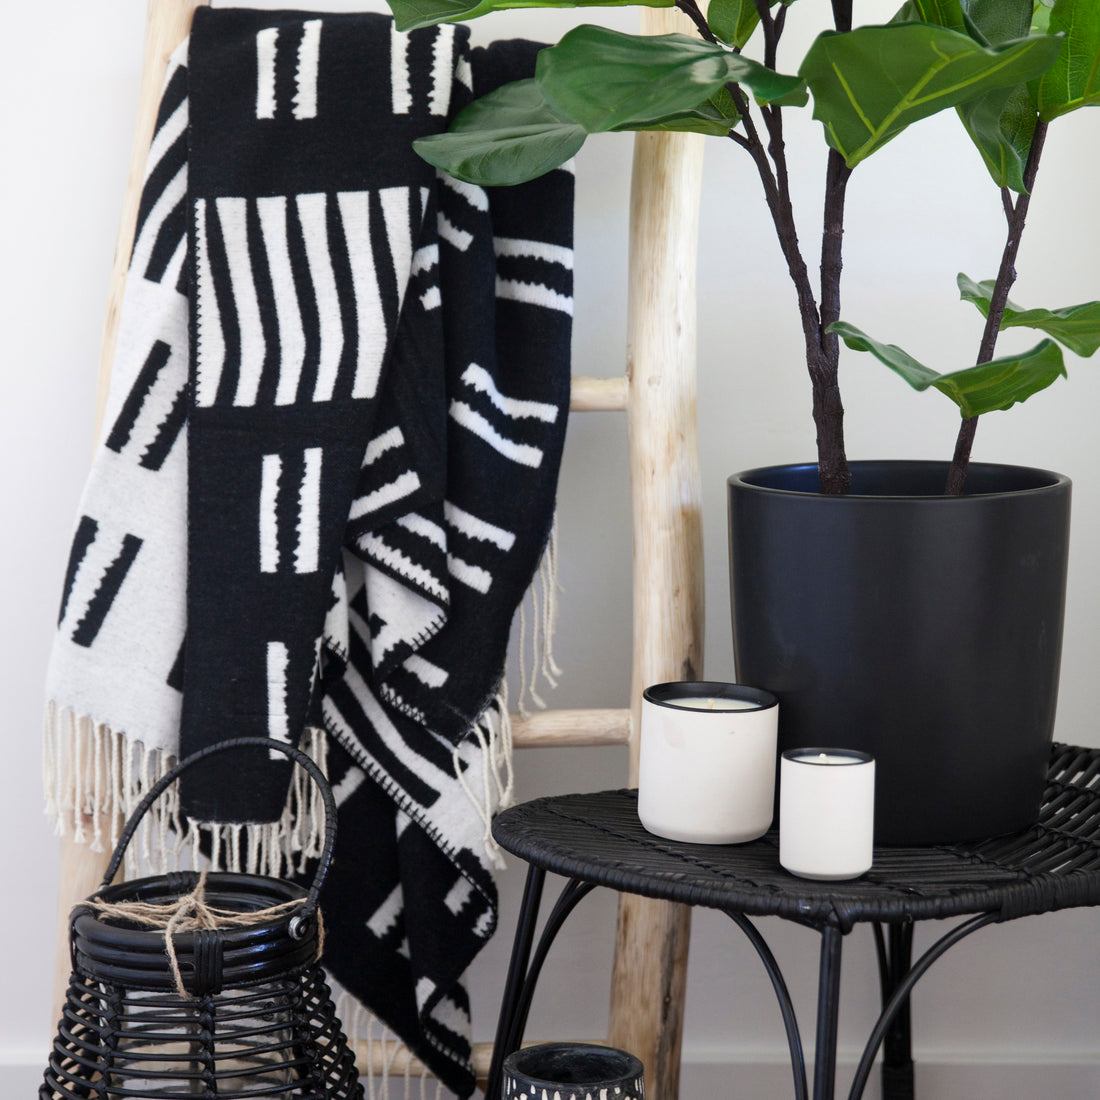 Black and White Home Decor Ideas from Standard Wax - Candles, Fiddle Leaf Fig, Plants, Blankets